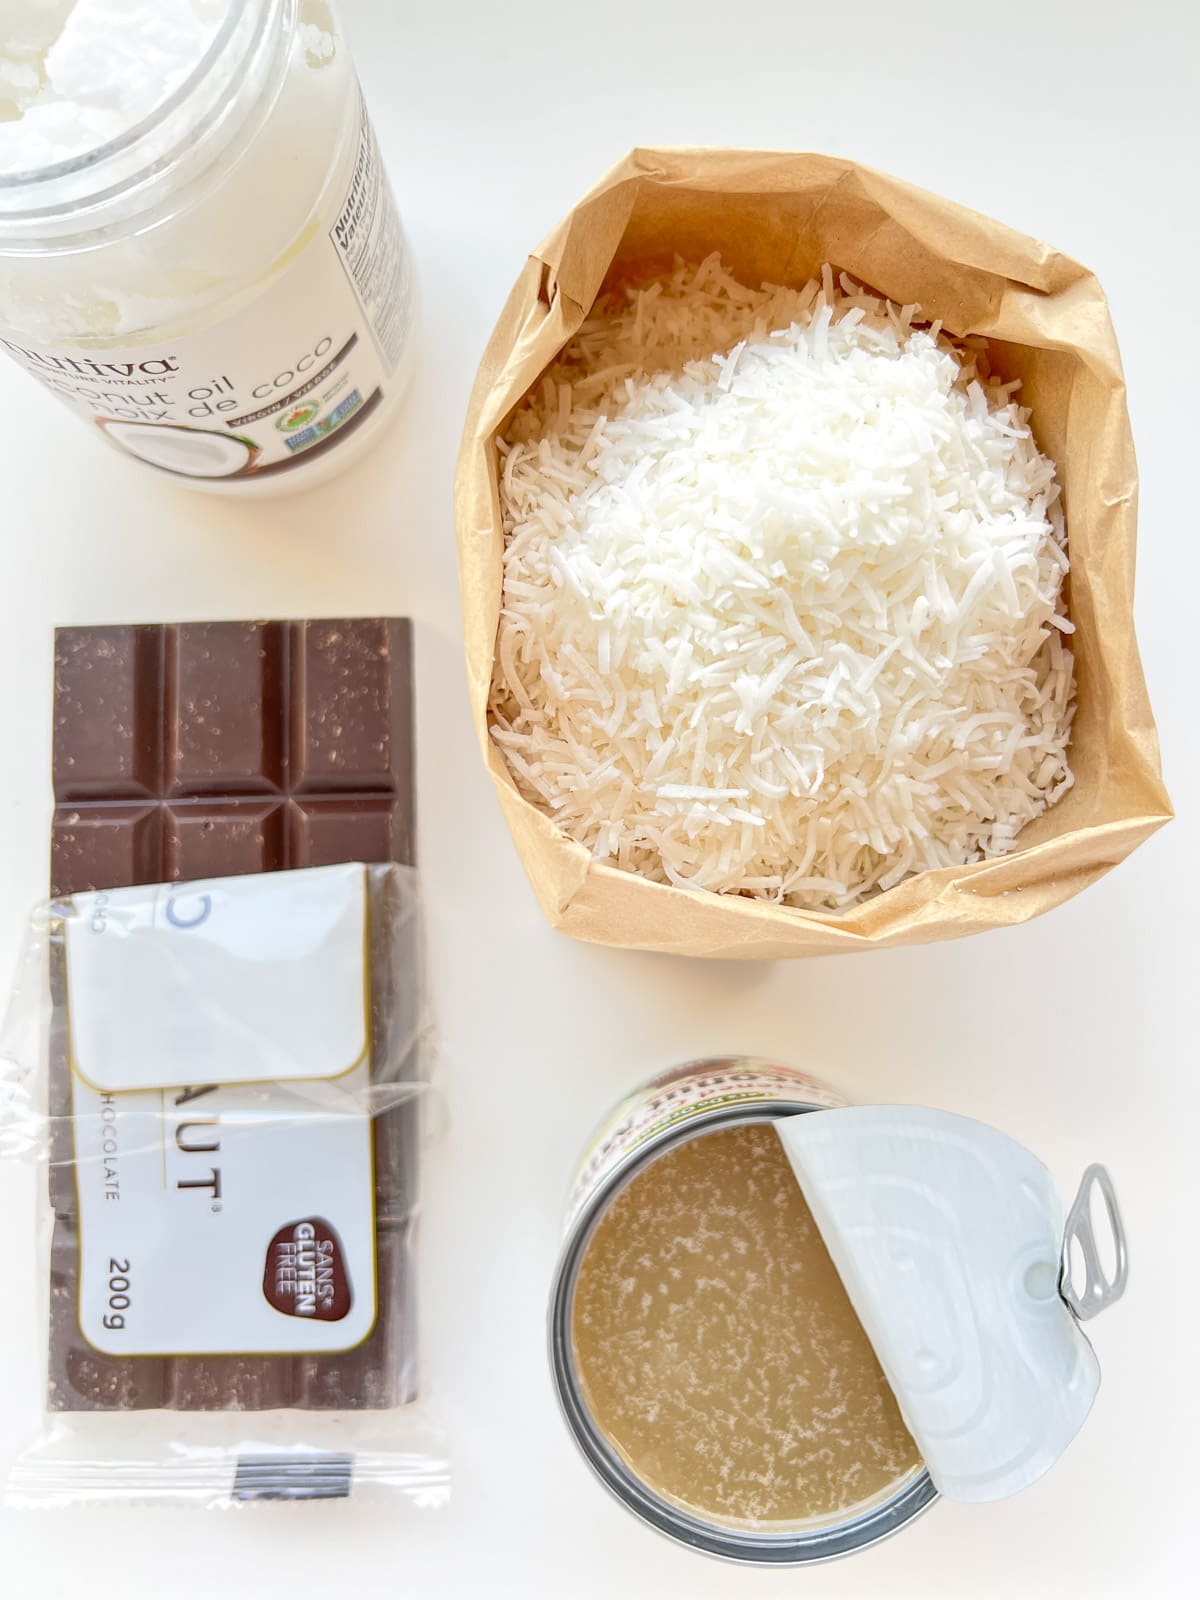 An image of the ingredients needed for Chocolate Coconut Bonbons, which includes a bar of dark chocolate, shredded coconut, condensed coconut milk, and coconut oil.